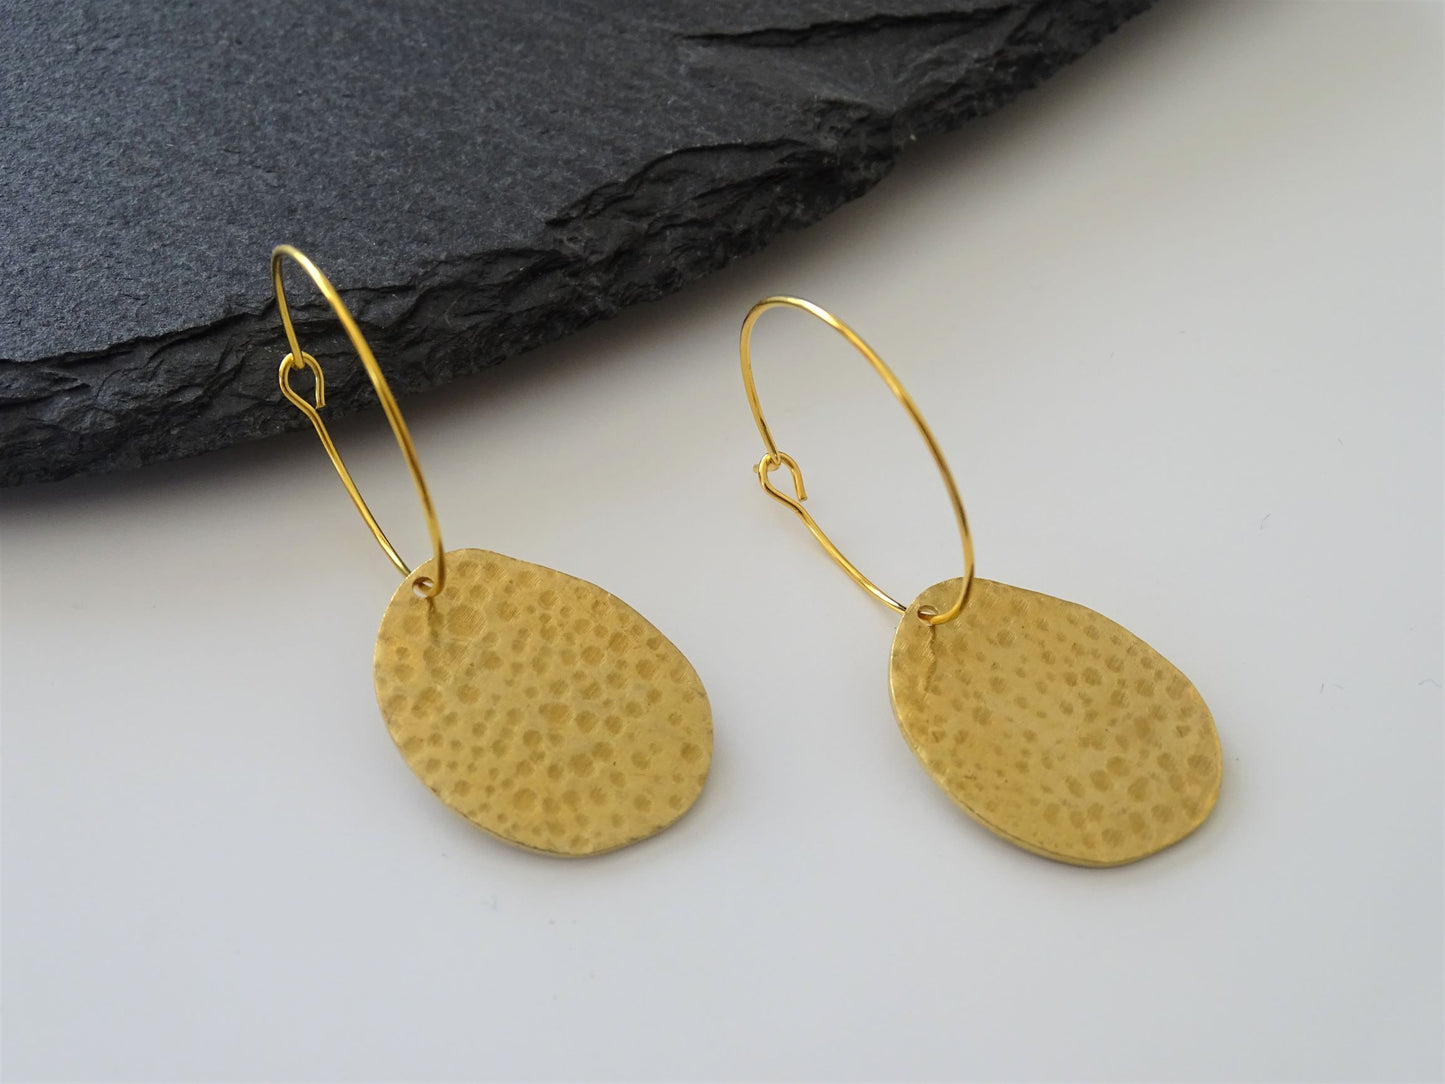 Gold hammered hoops